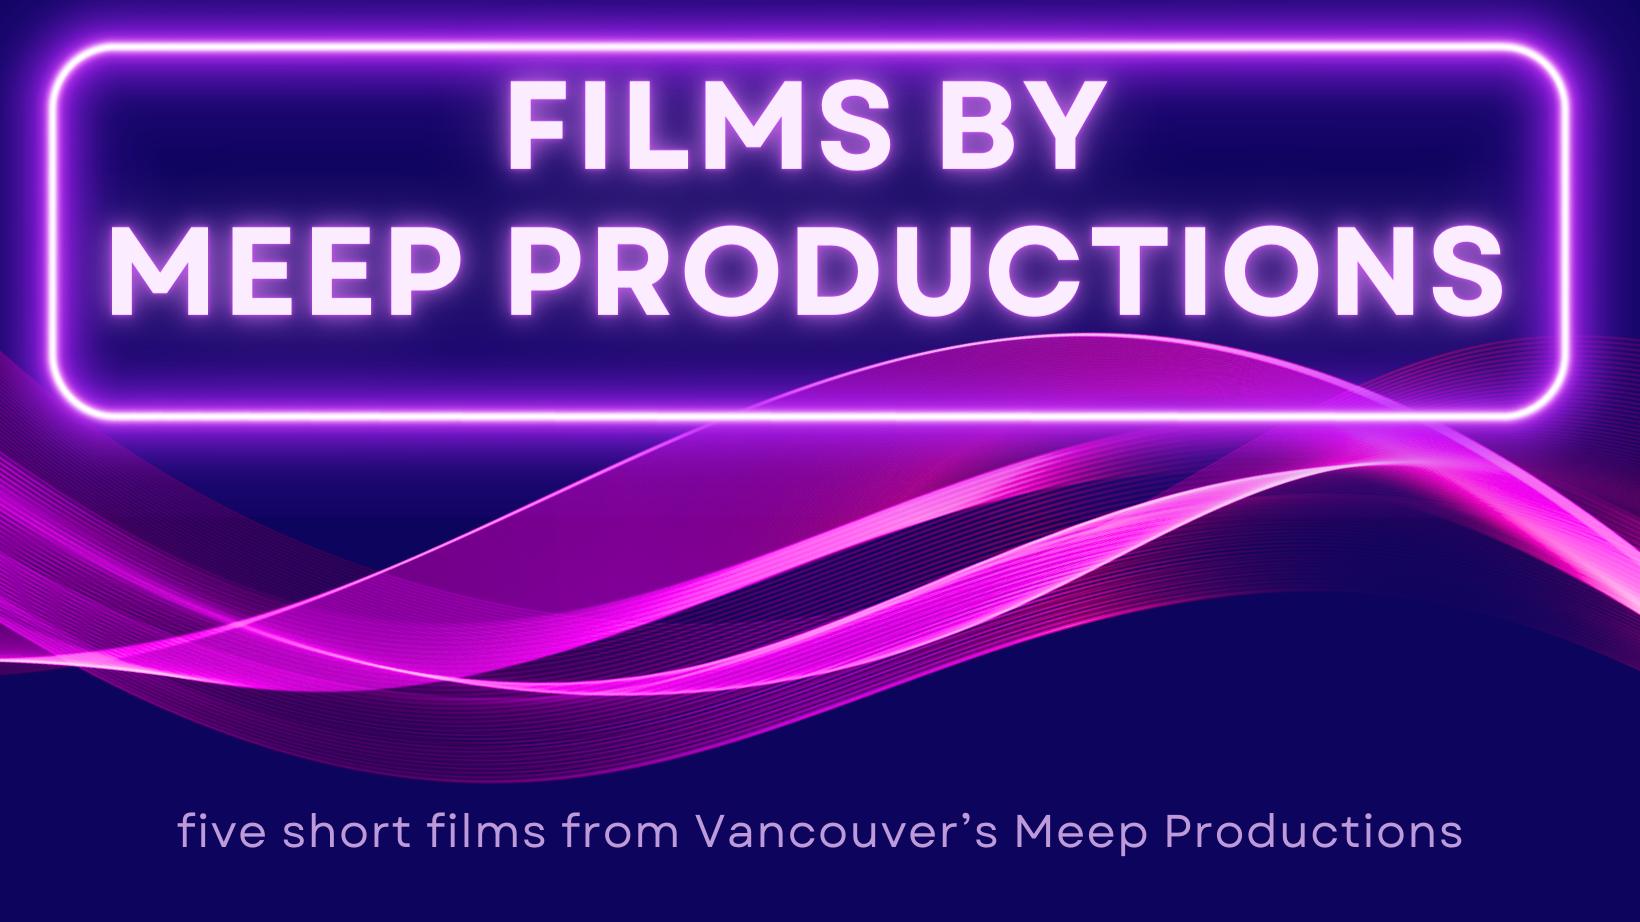 Films by Meep Productions